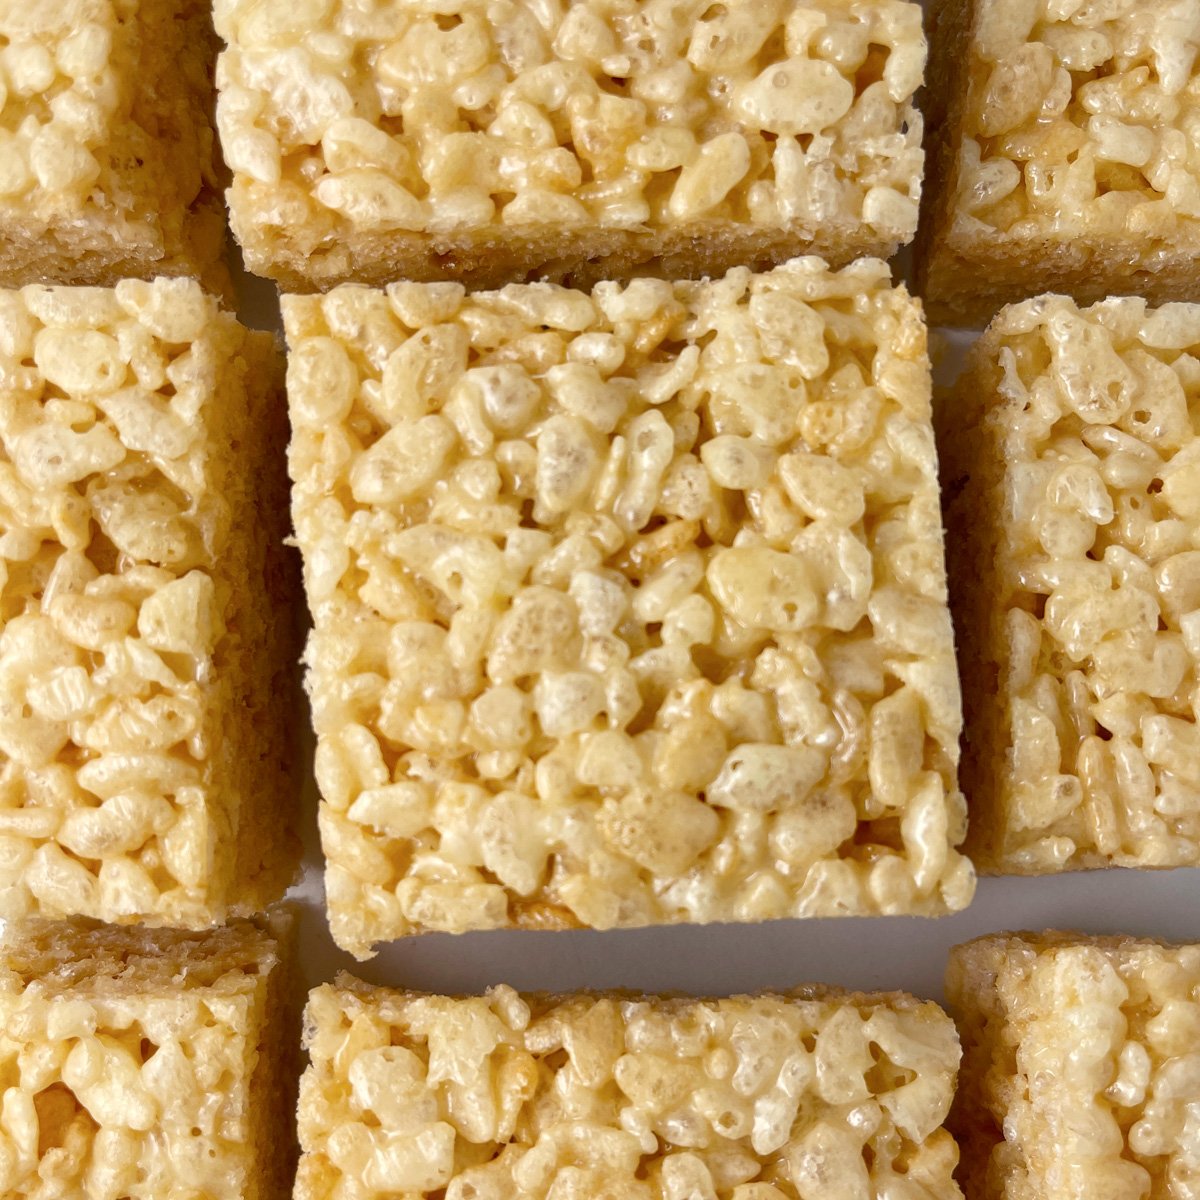 Classic rice krispies treats made with the original recipe from the box.